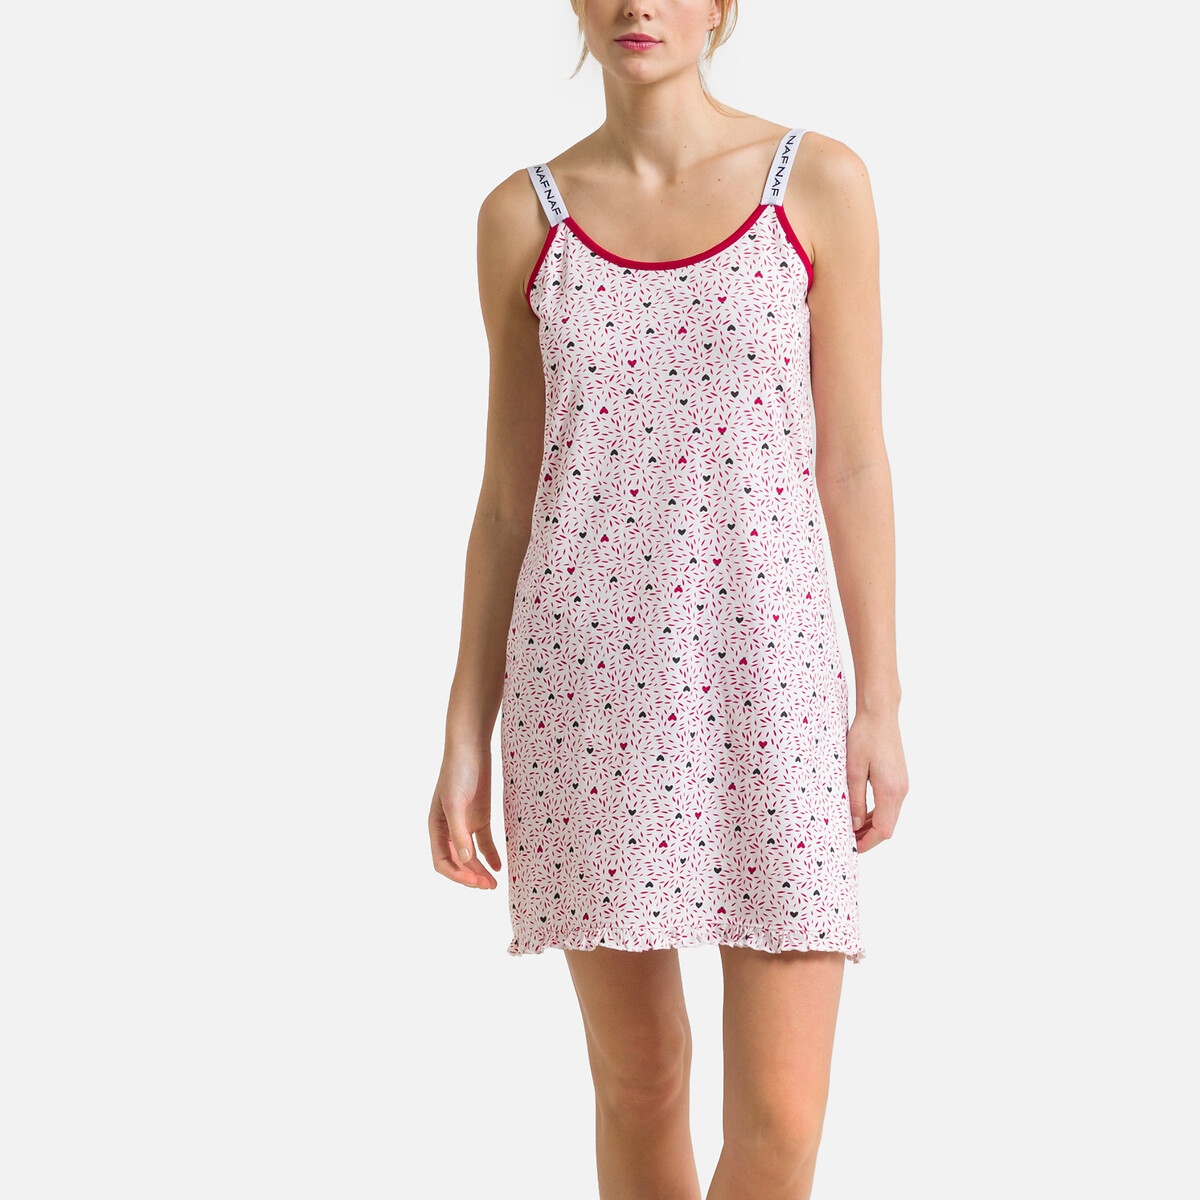 Amore Cotton Nightie and Knickers